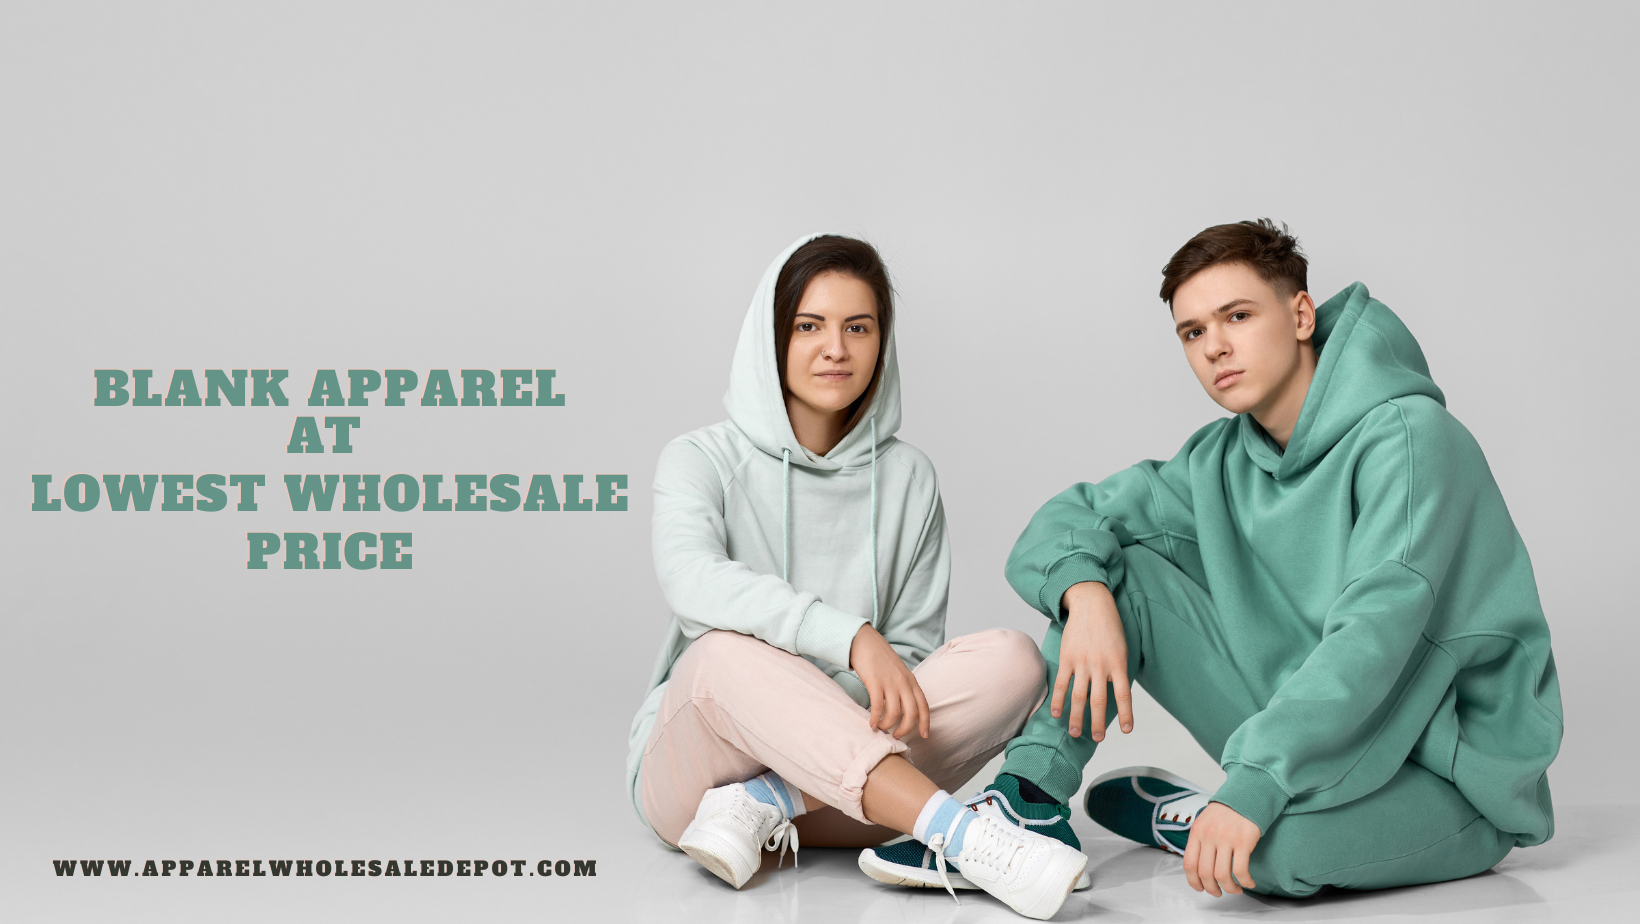 Blank apparel at lowest wholesale price 410c7758 cade 4b98 91c6 173e5b19418a